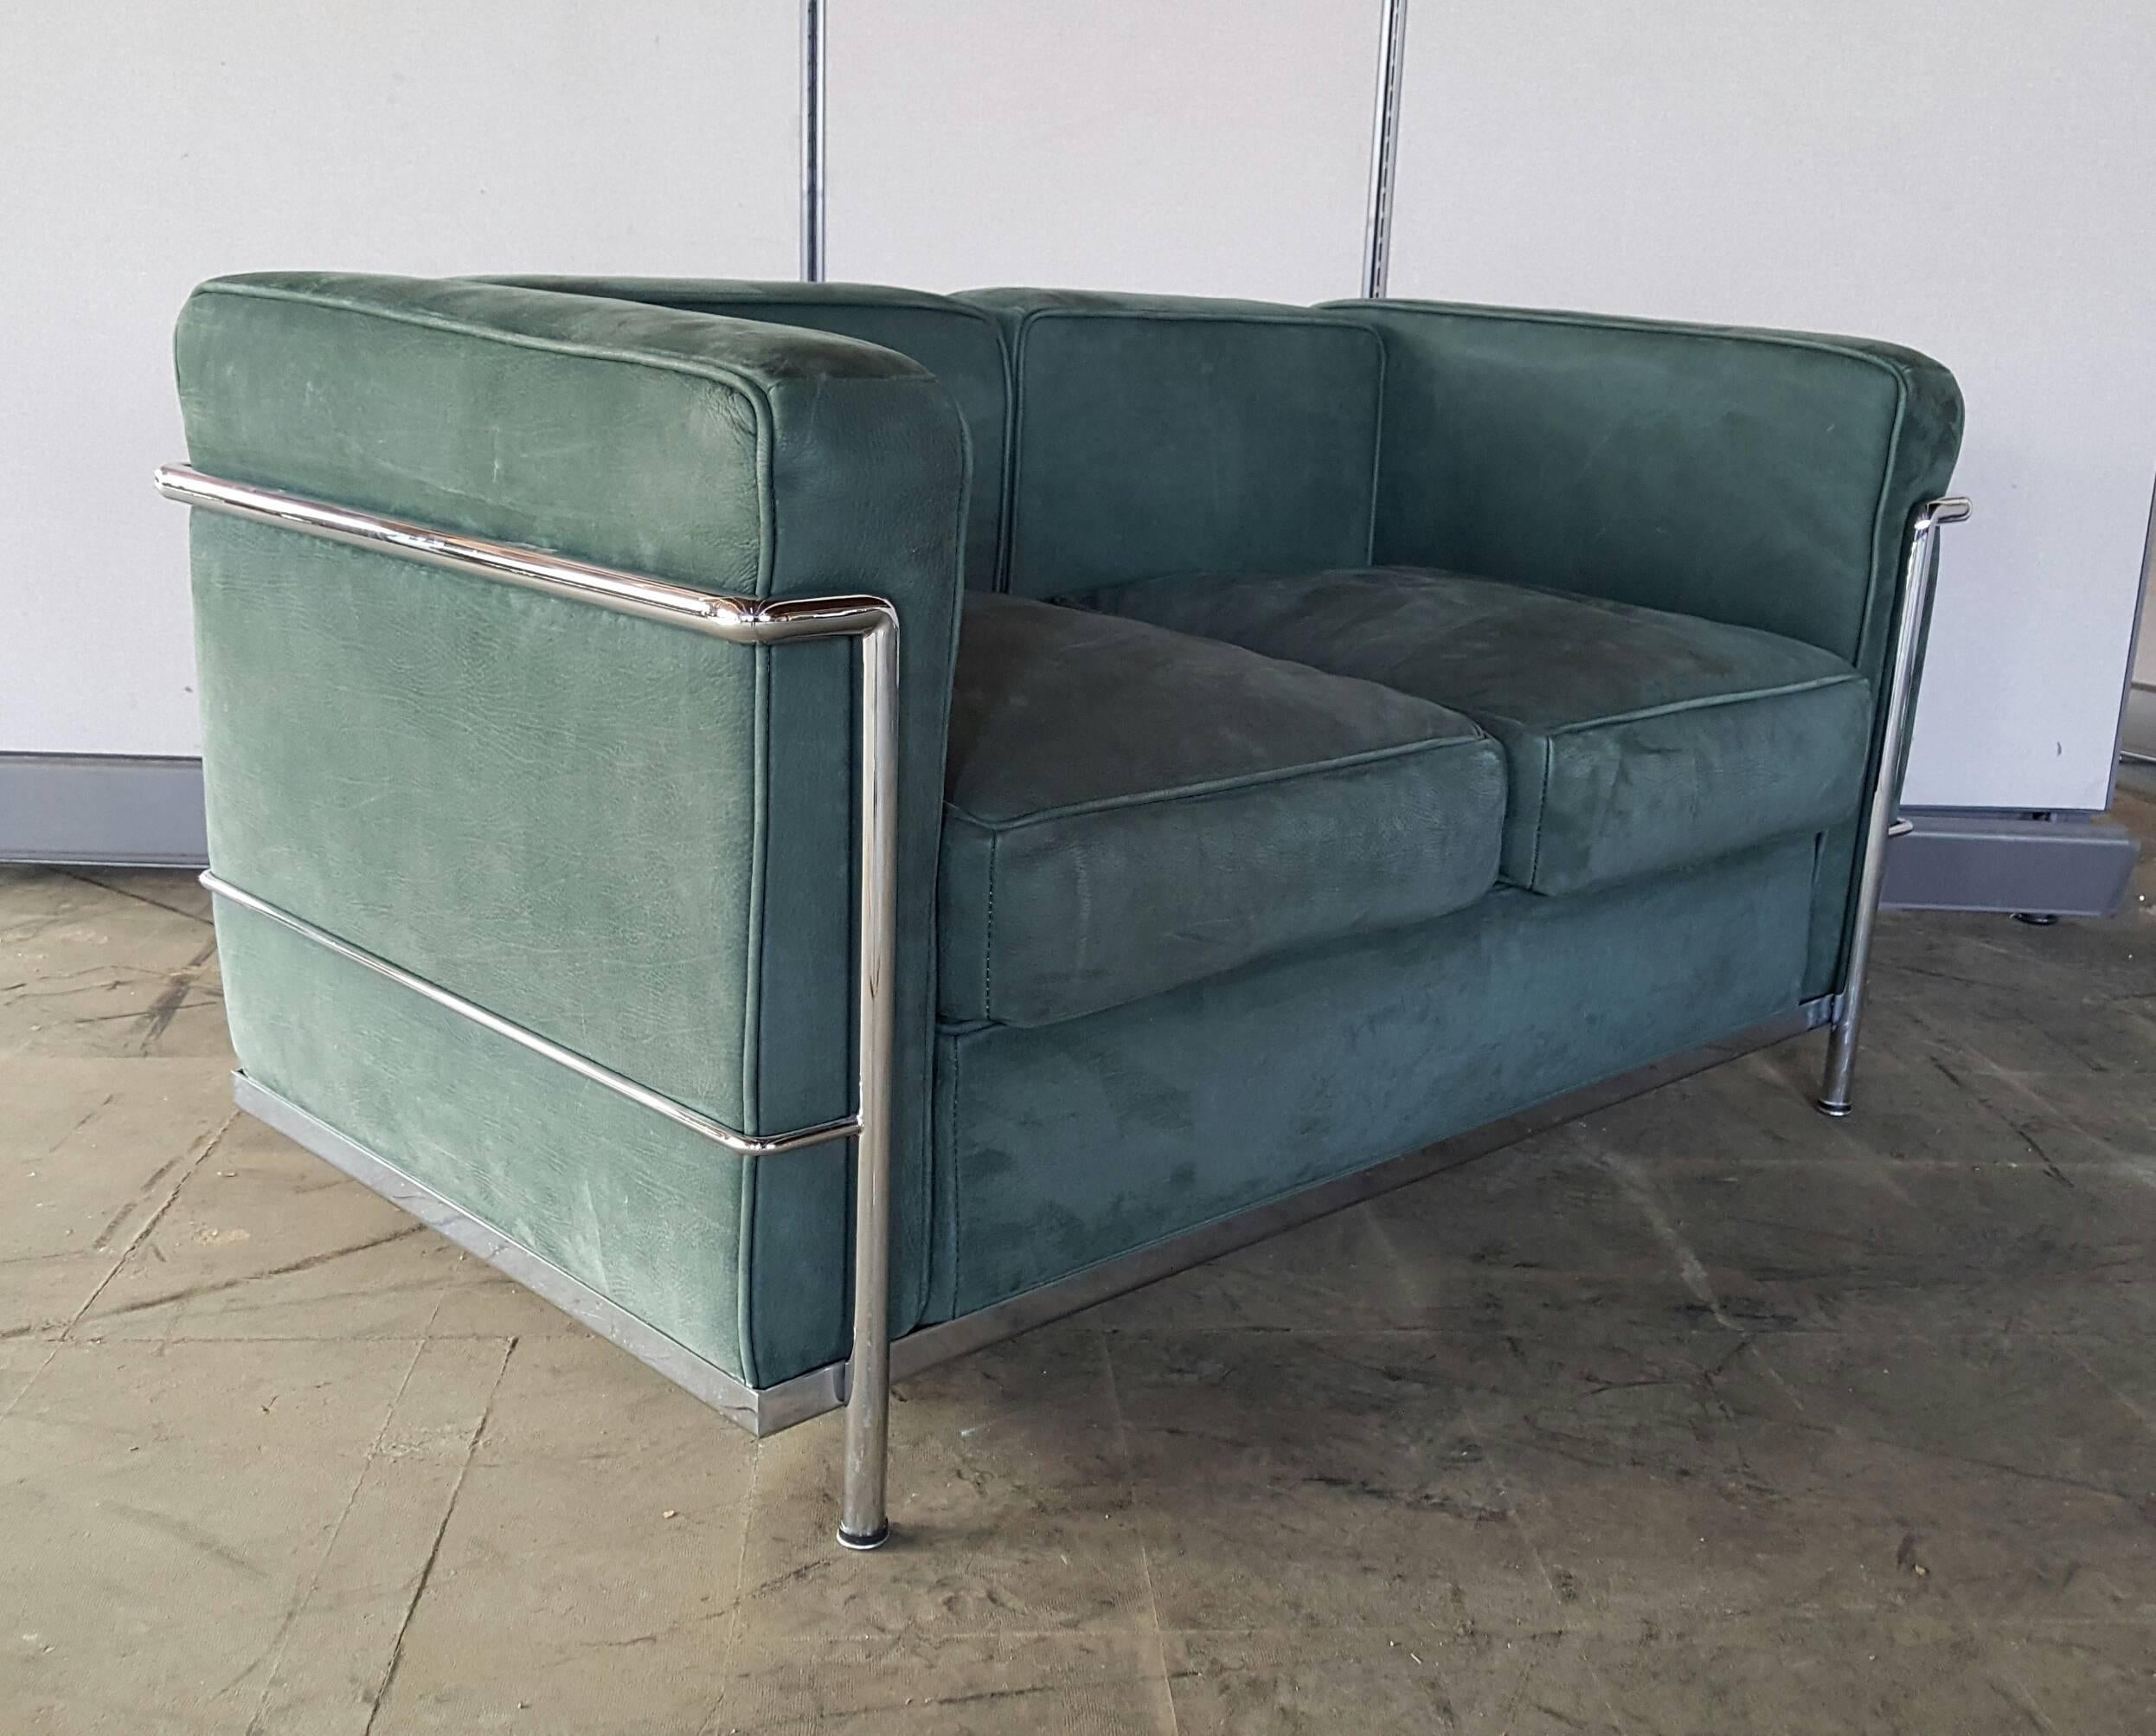 Beautiful LC3 two-seat sofa by Le Corbusier, made in Italy, circa 1980. This eye-catching sofa is upholstered in high quality emerald green suede and has a very recognizable chrome metal base, making it a very recognizable Le Corbusier piece that is